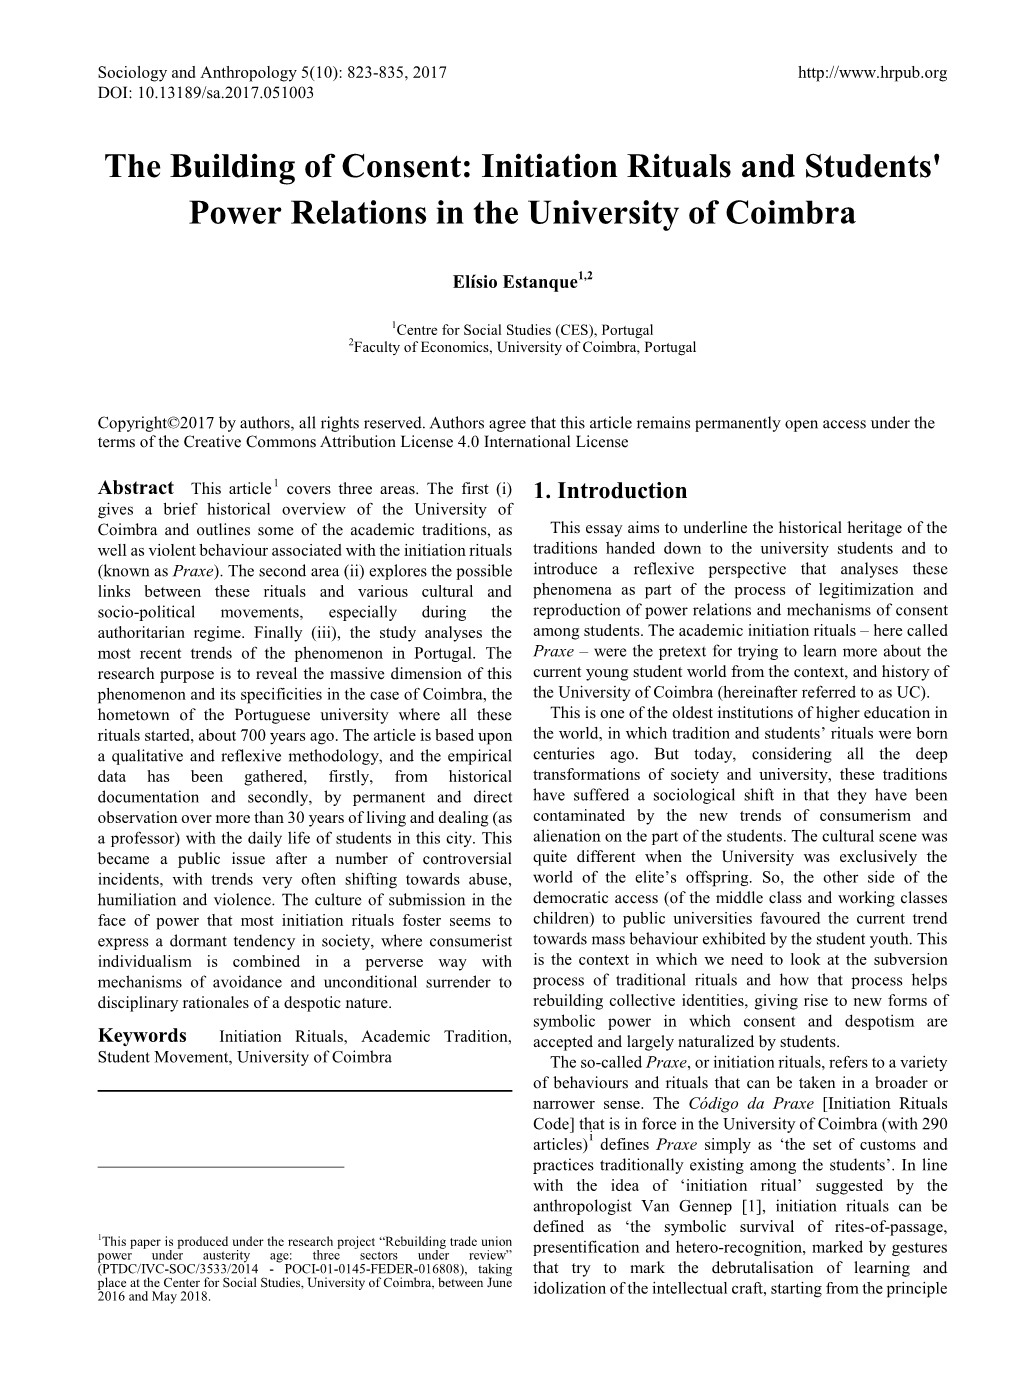 The Building of Consent: Initiation Rituals and Students' Power Relations in the University of Coimbra